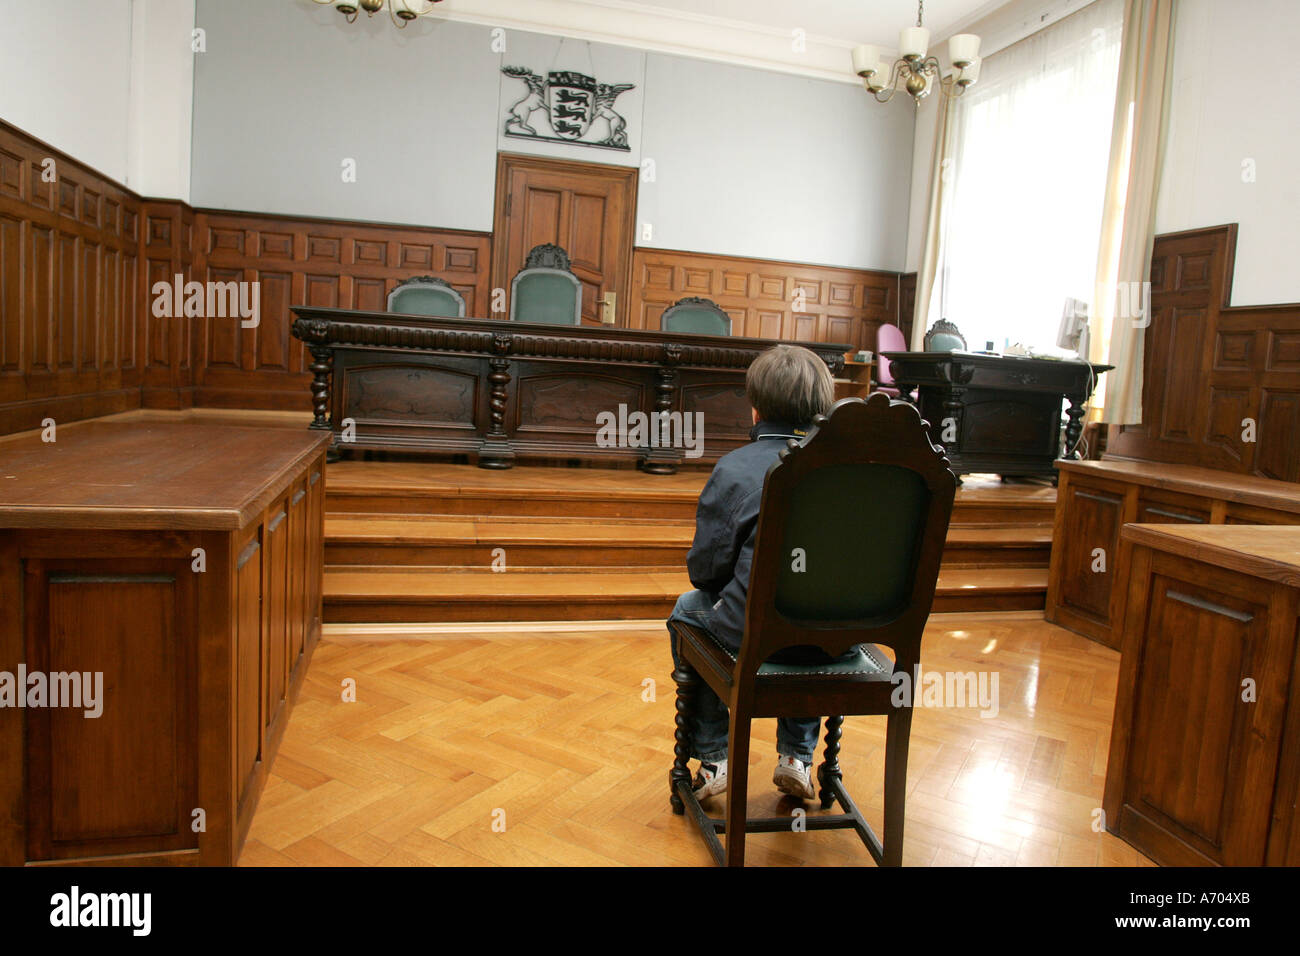 12.07.2005, Weinheim, DEU, child sits before the judge's chair of the district court Stock Photo